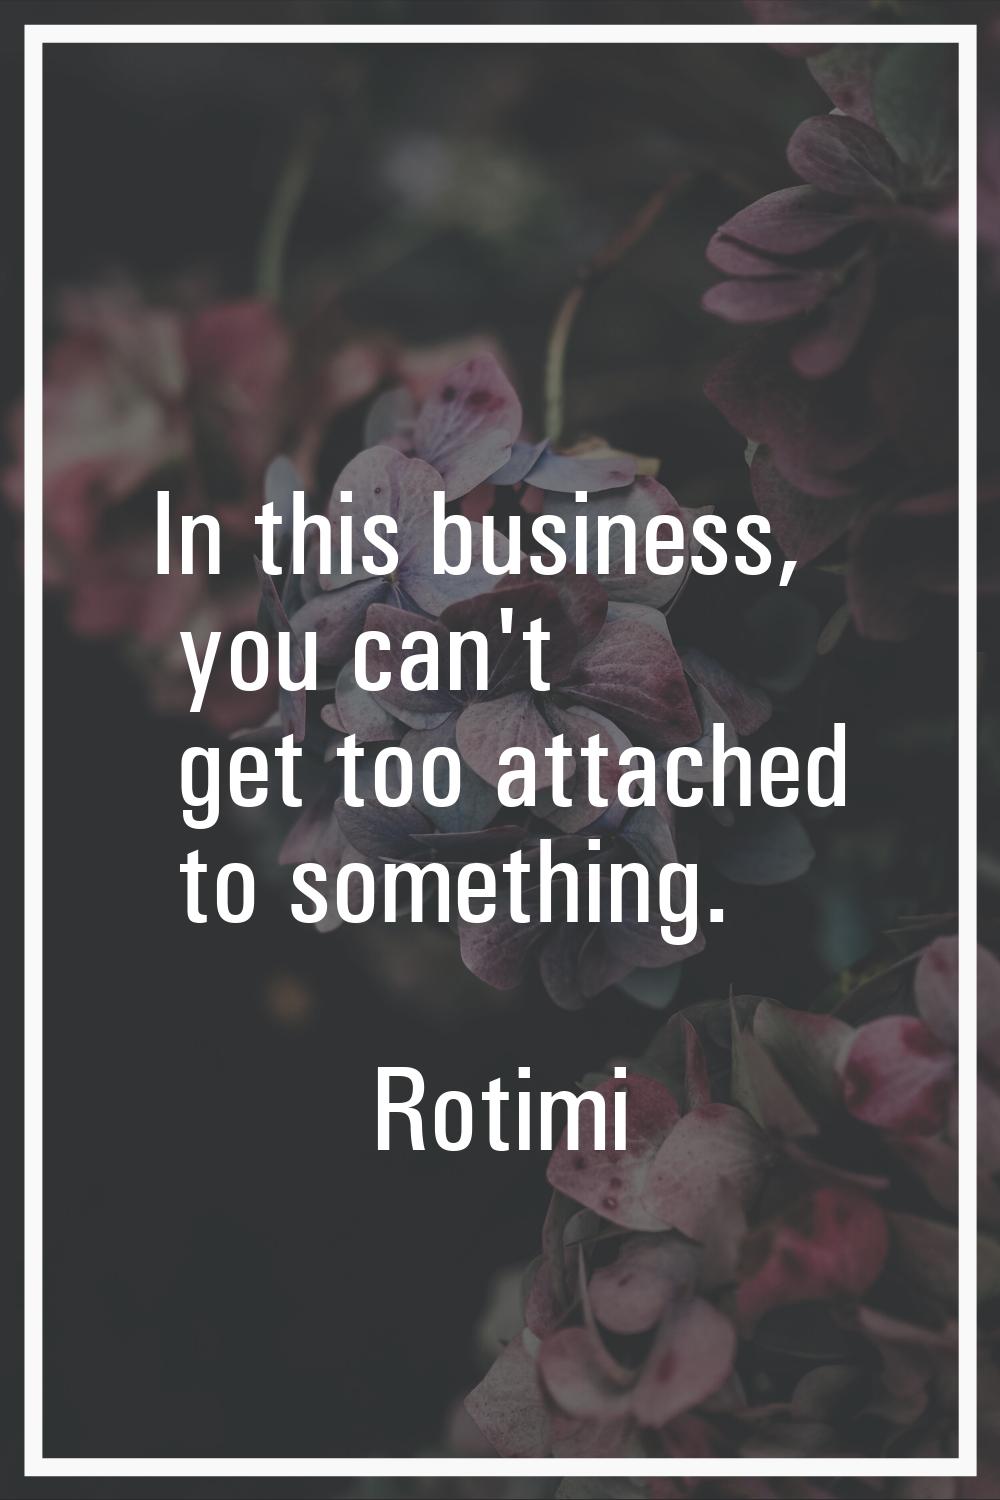 In this business, you can't get too attached to something.